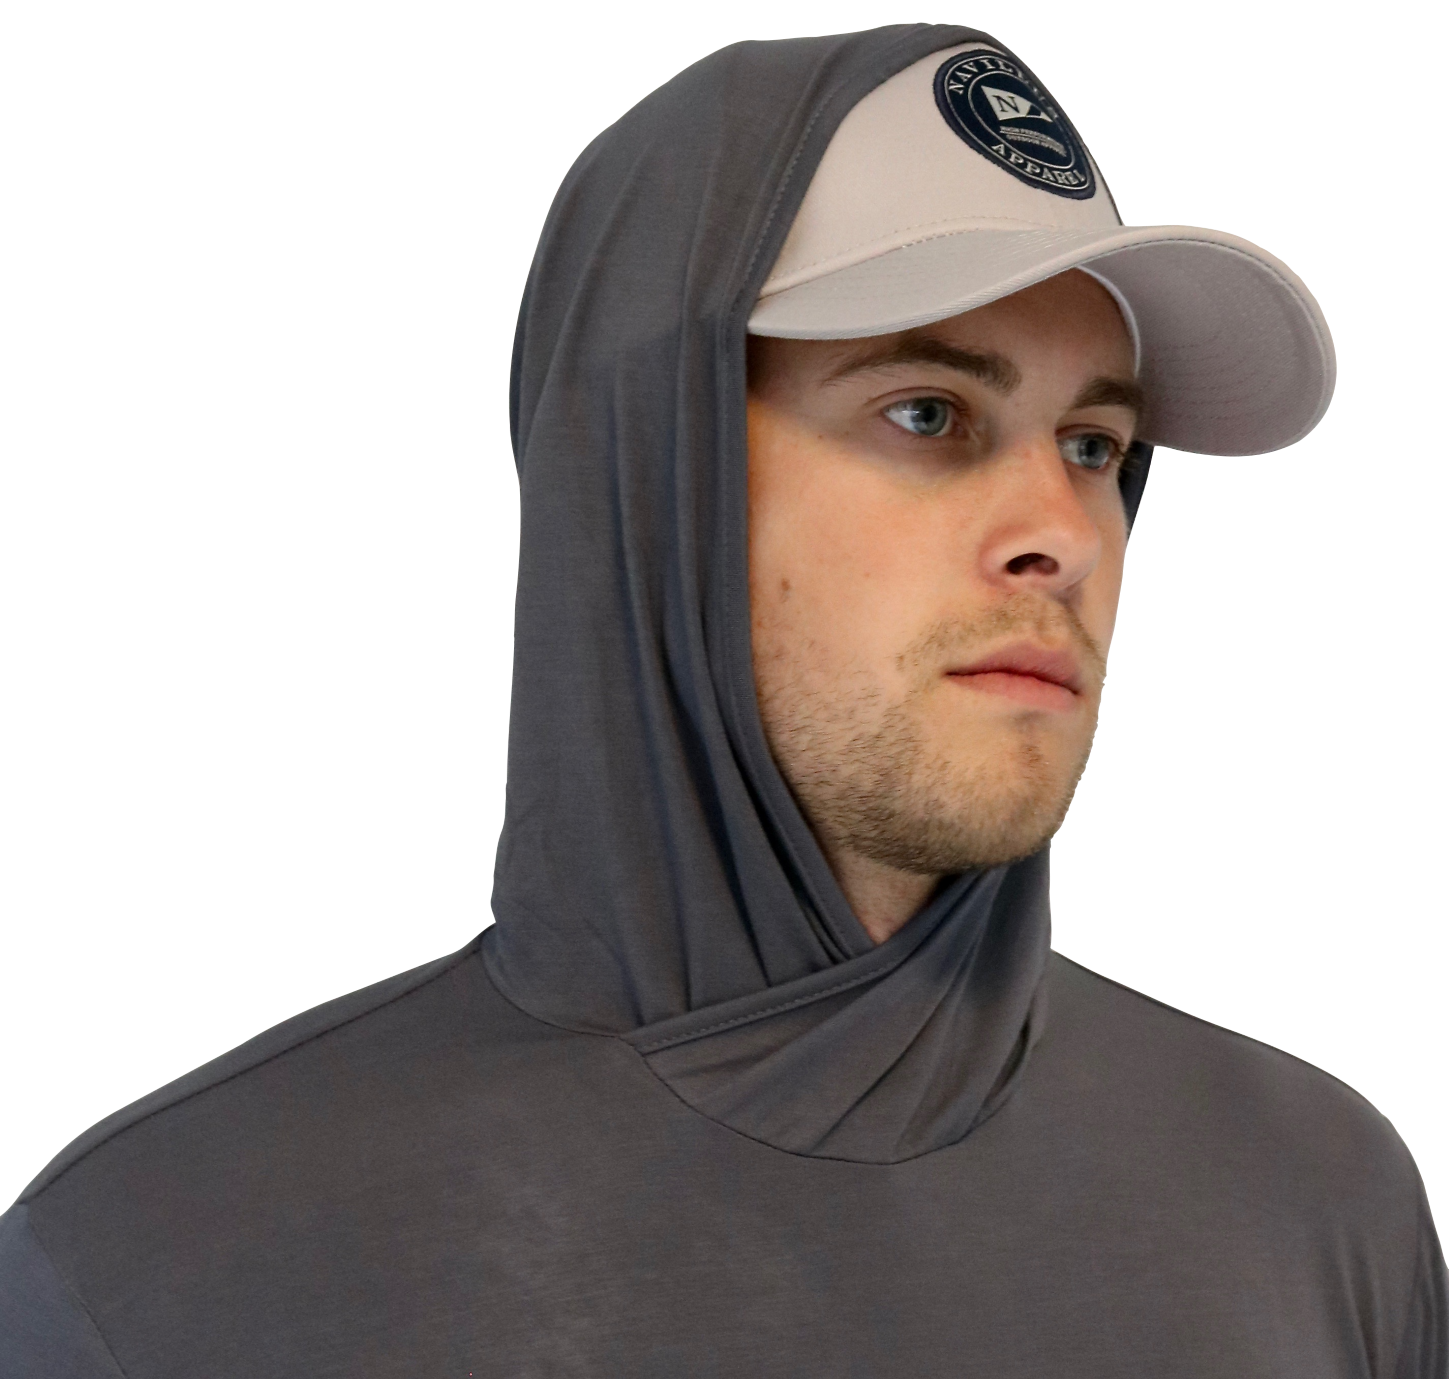 Hood of the Angler Crossover Bamboo Hoodie in Charcoal. This hood provides all around sun protection.